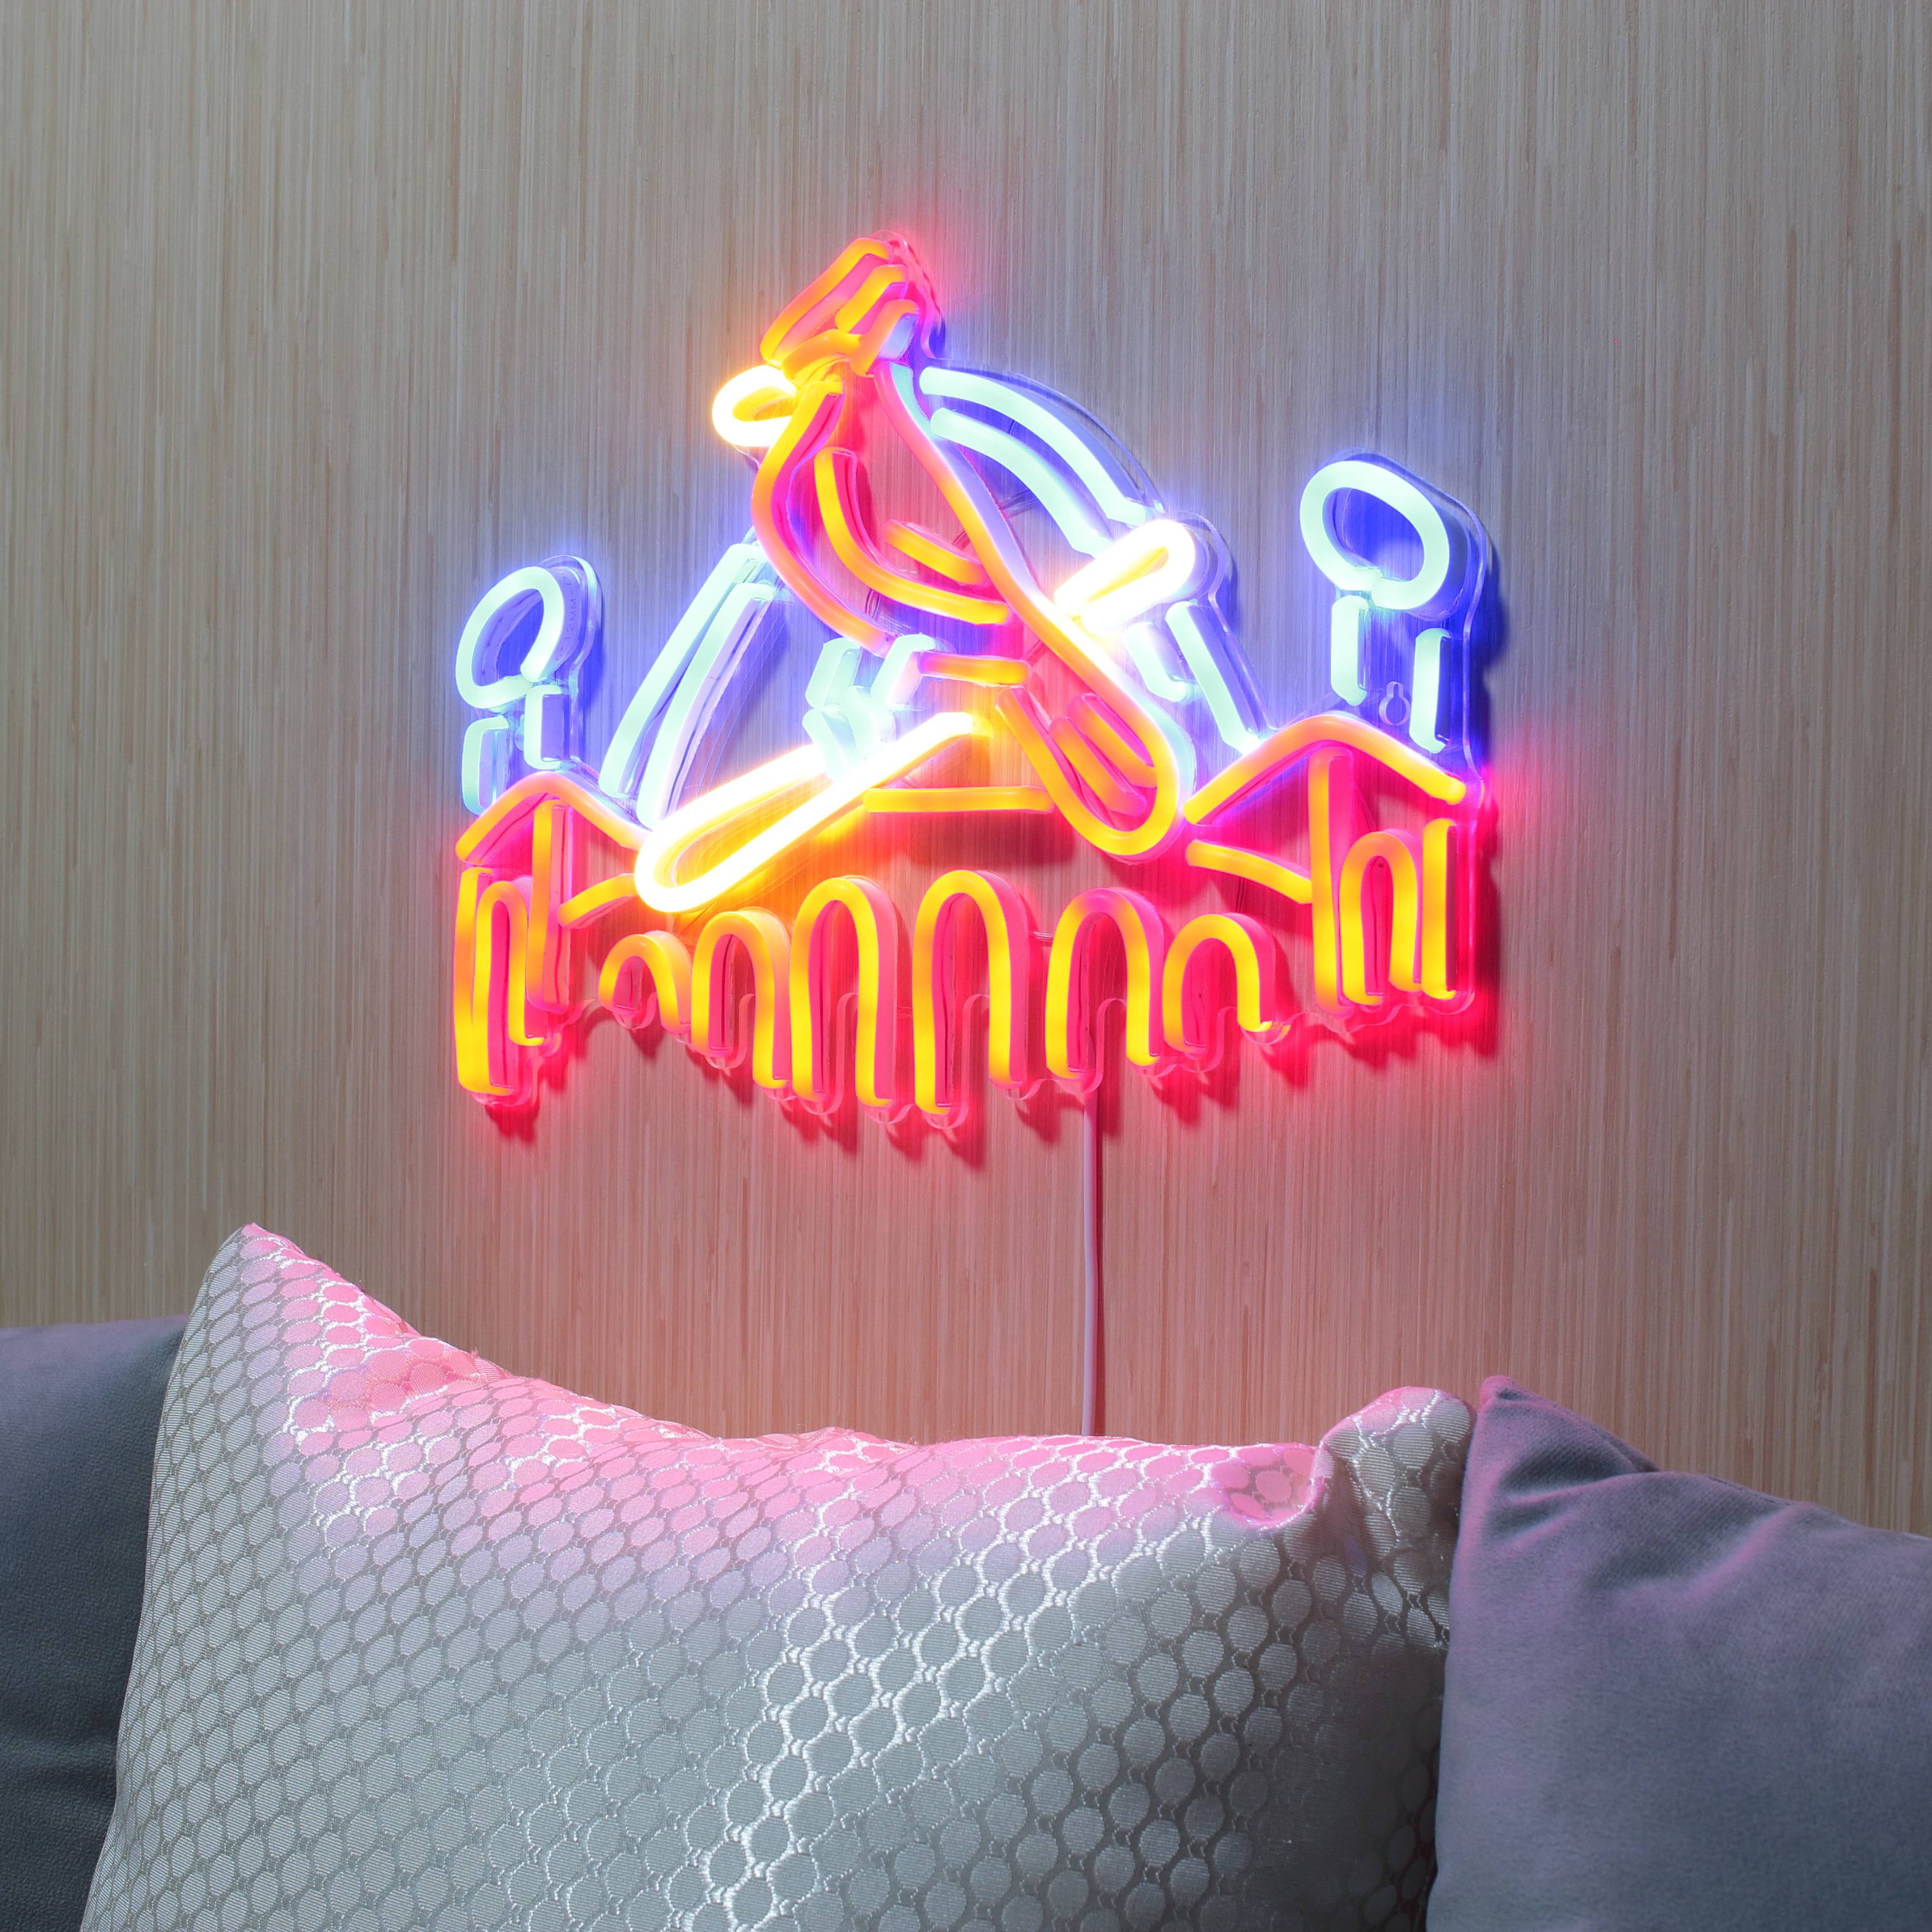 Budweiser with Cardinal Large Flex Neon LED Sign